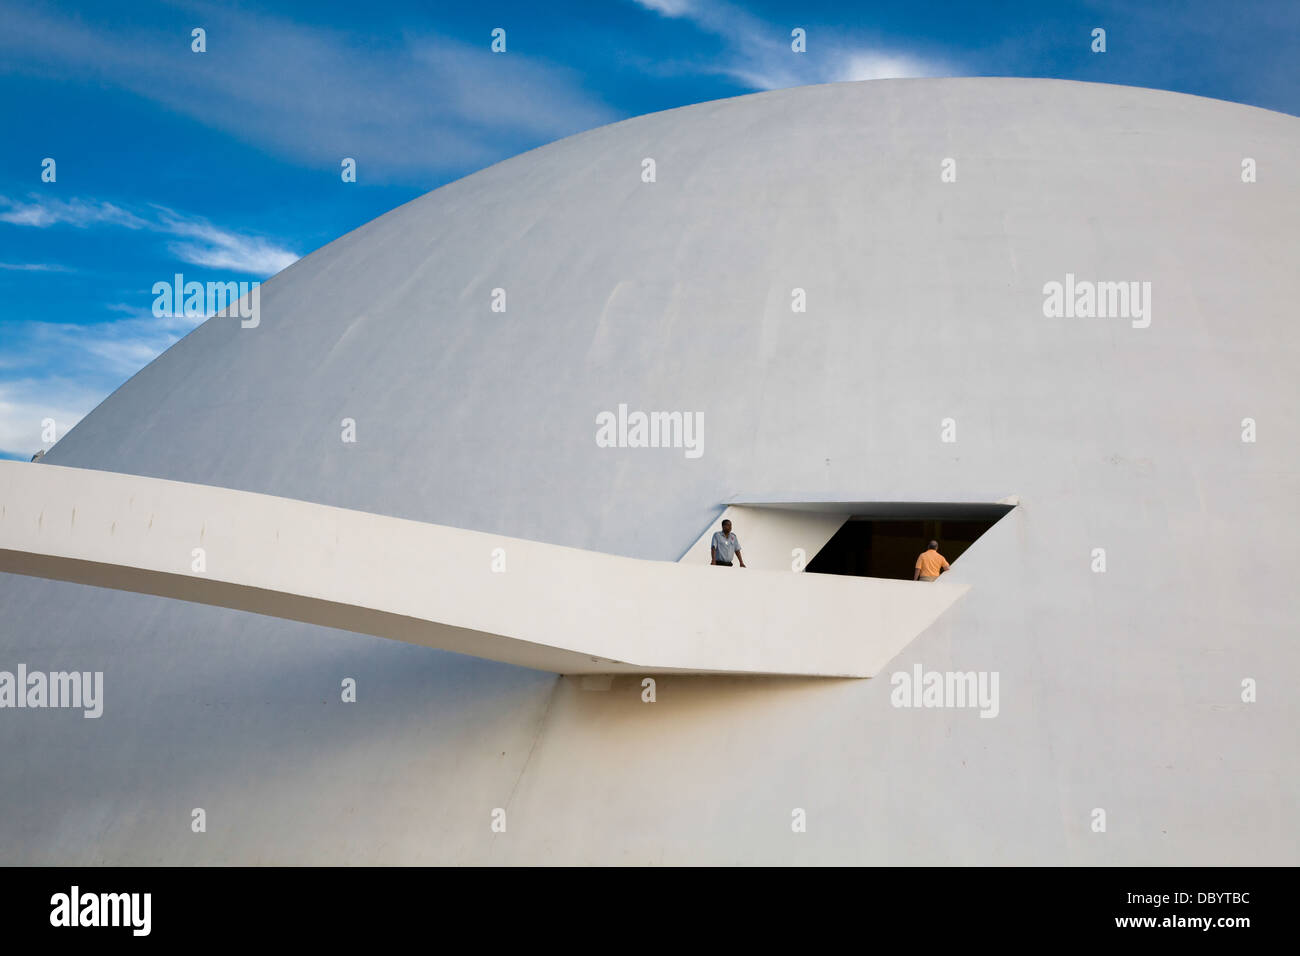 A large ramp connects to the dome of the National Museum of the Republic, designed by Oscar Niemeyer (Brasília, Brazil) Stock Photo